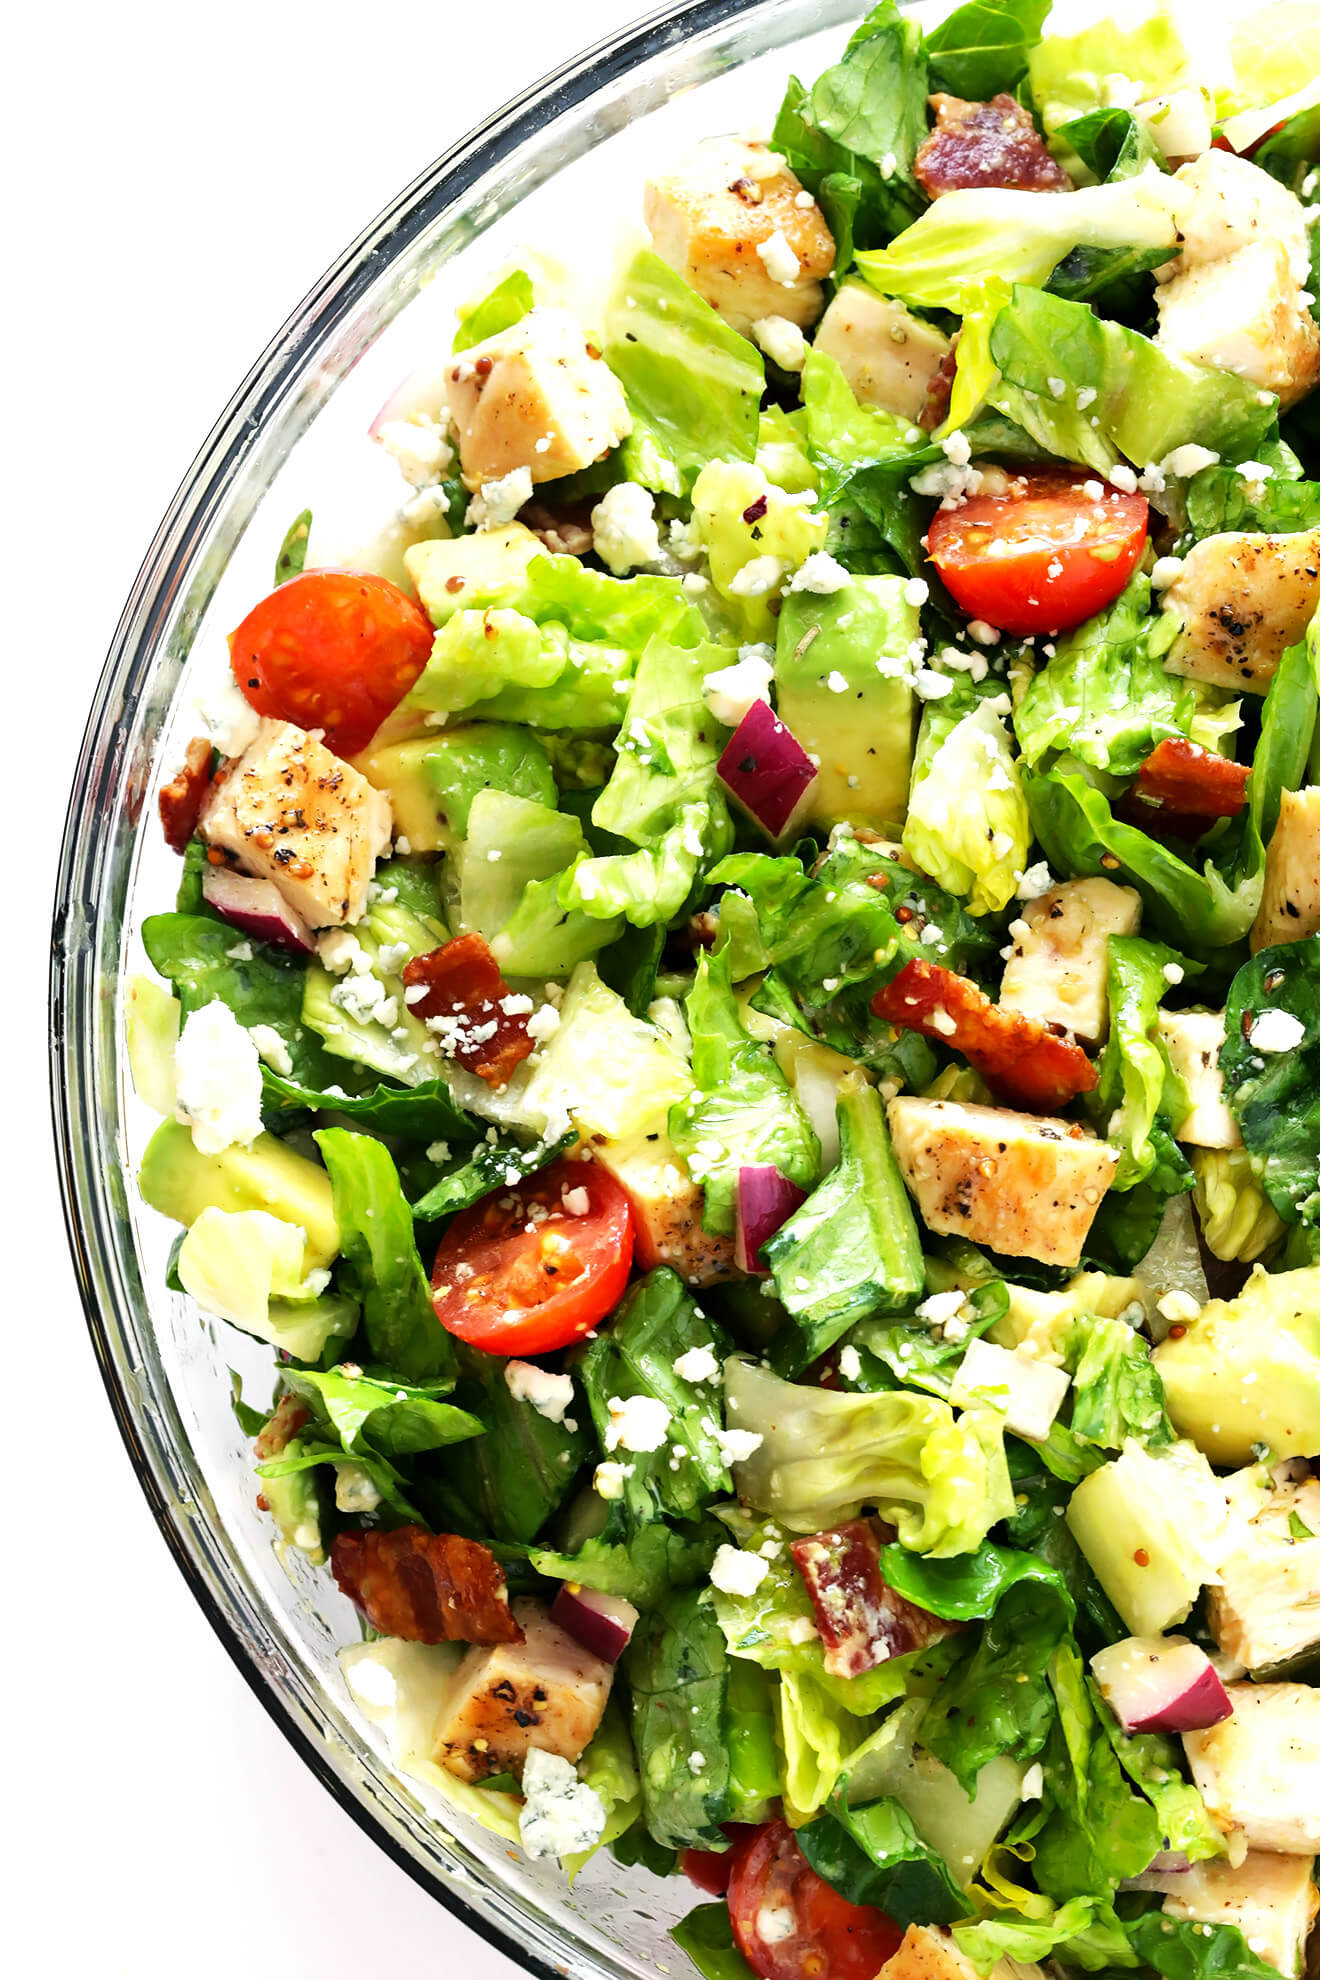 Best Ranch Chopped Salad Recipe - How to Make Ranch Chopped Salad